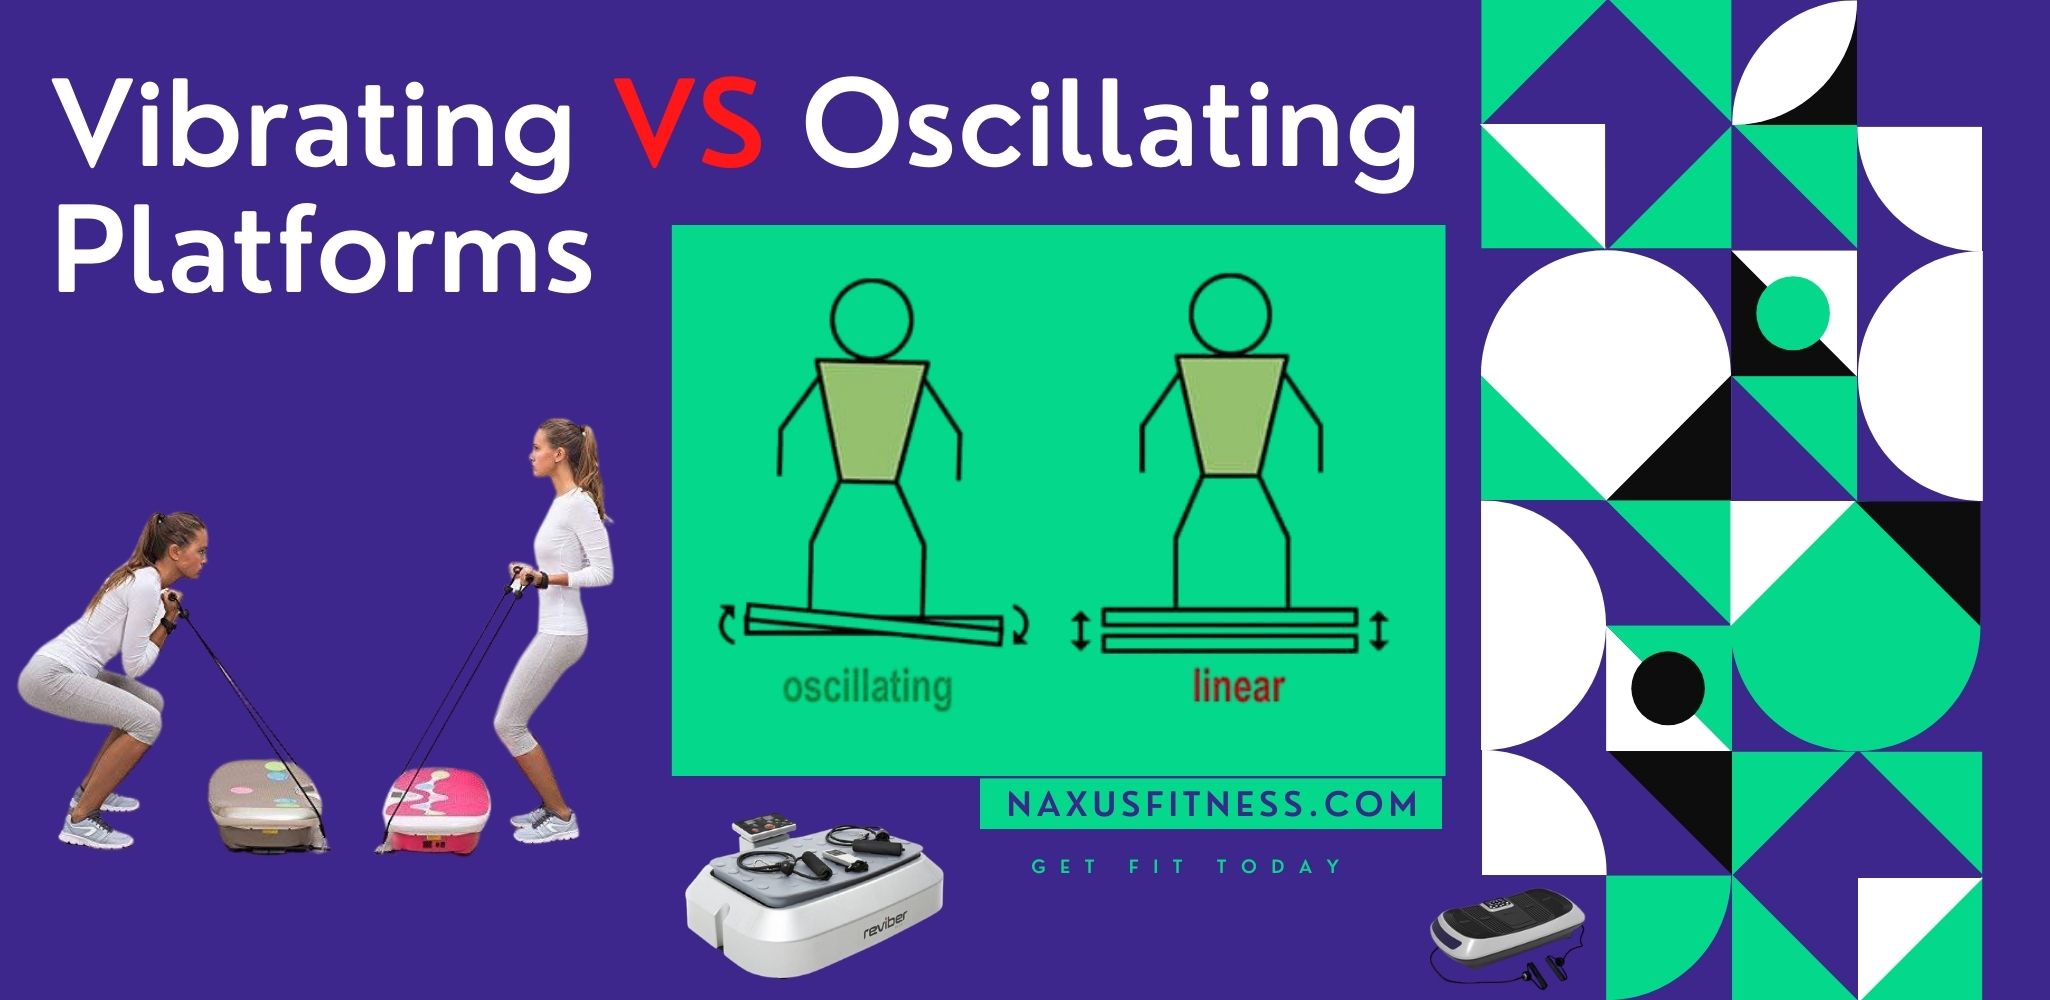 Vibrating VS Oscillating Platforms What is the best